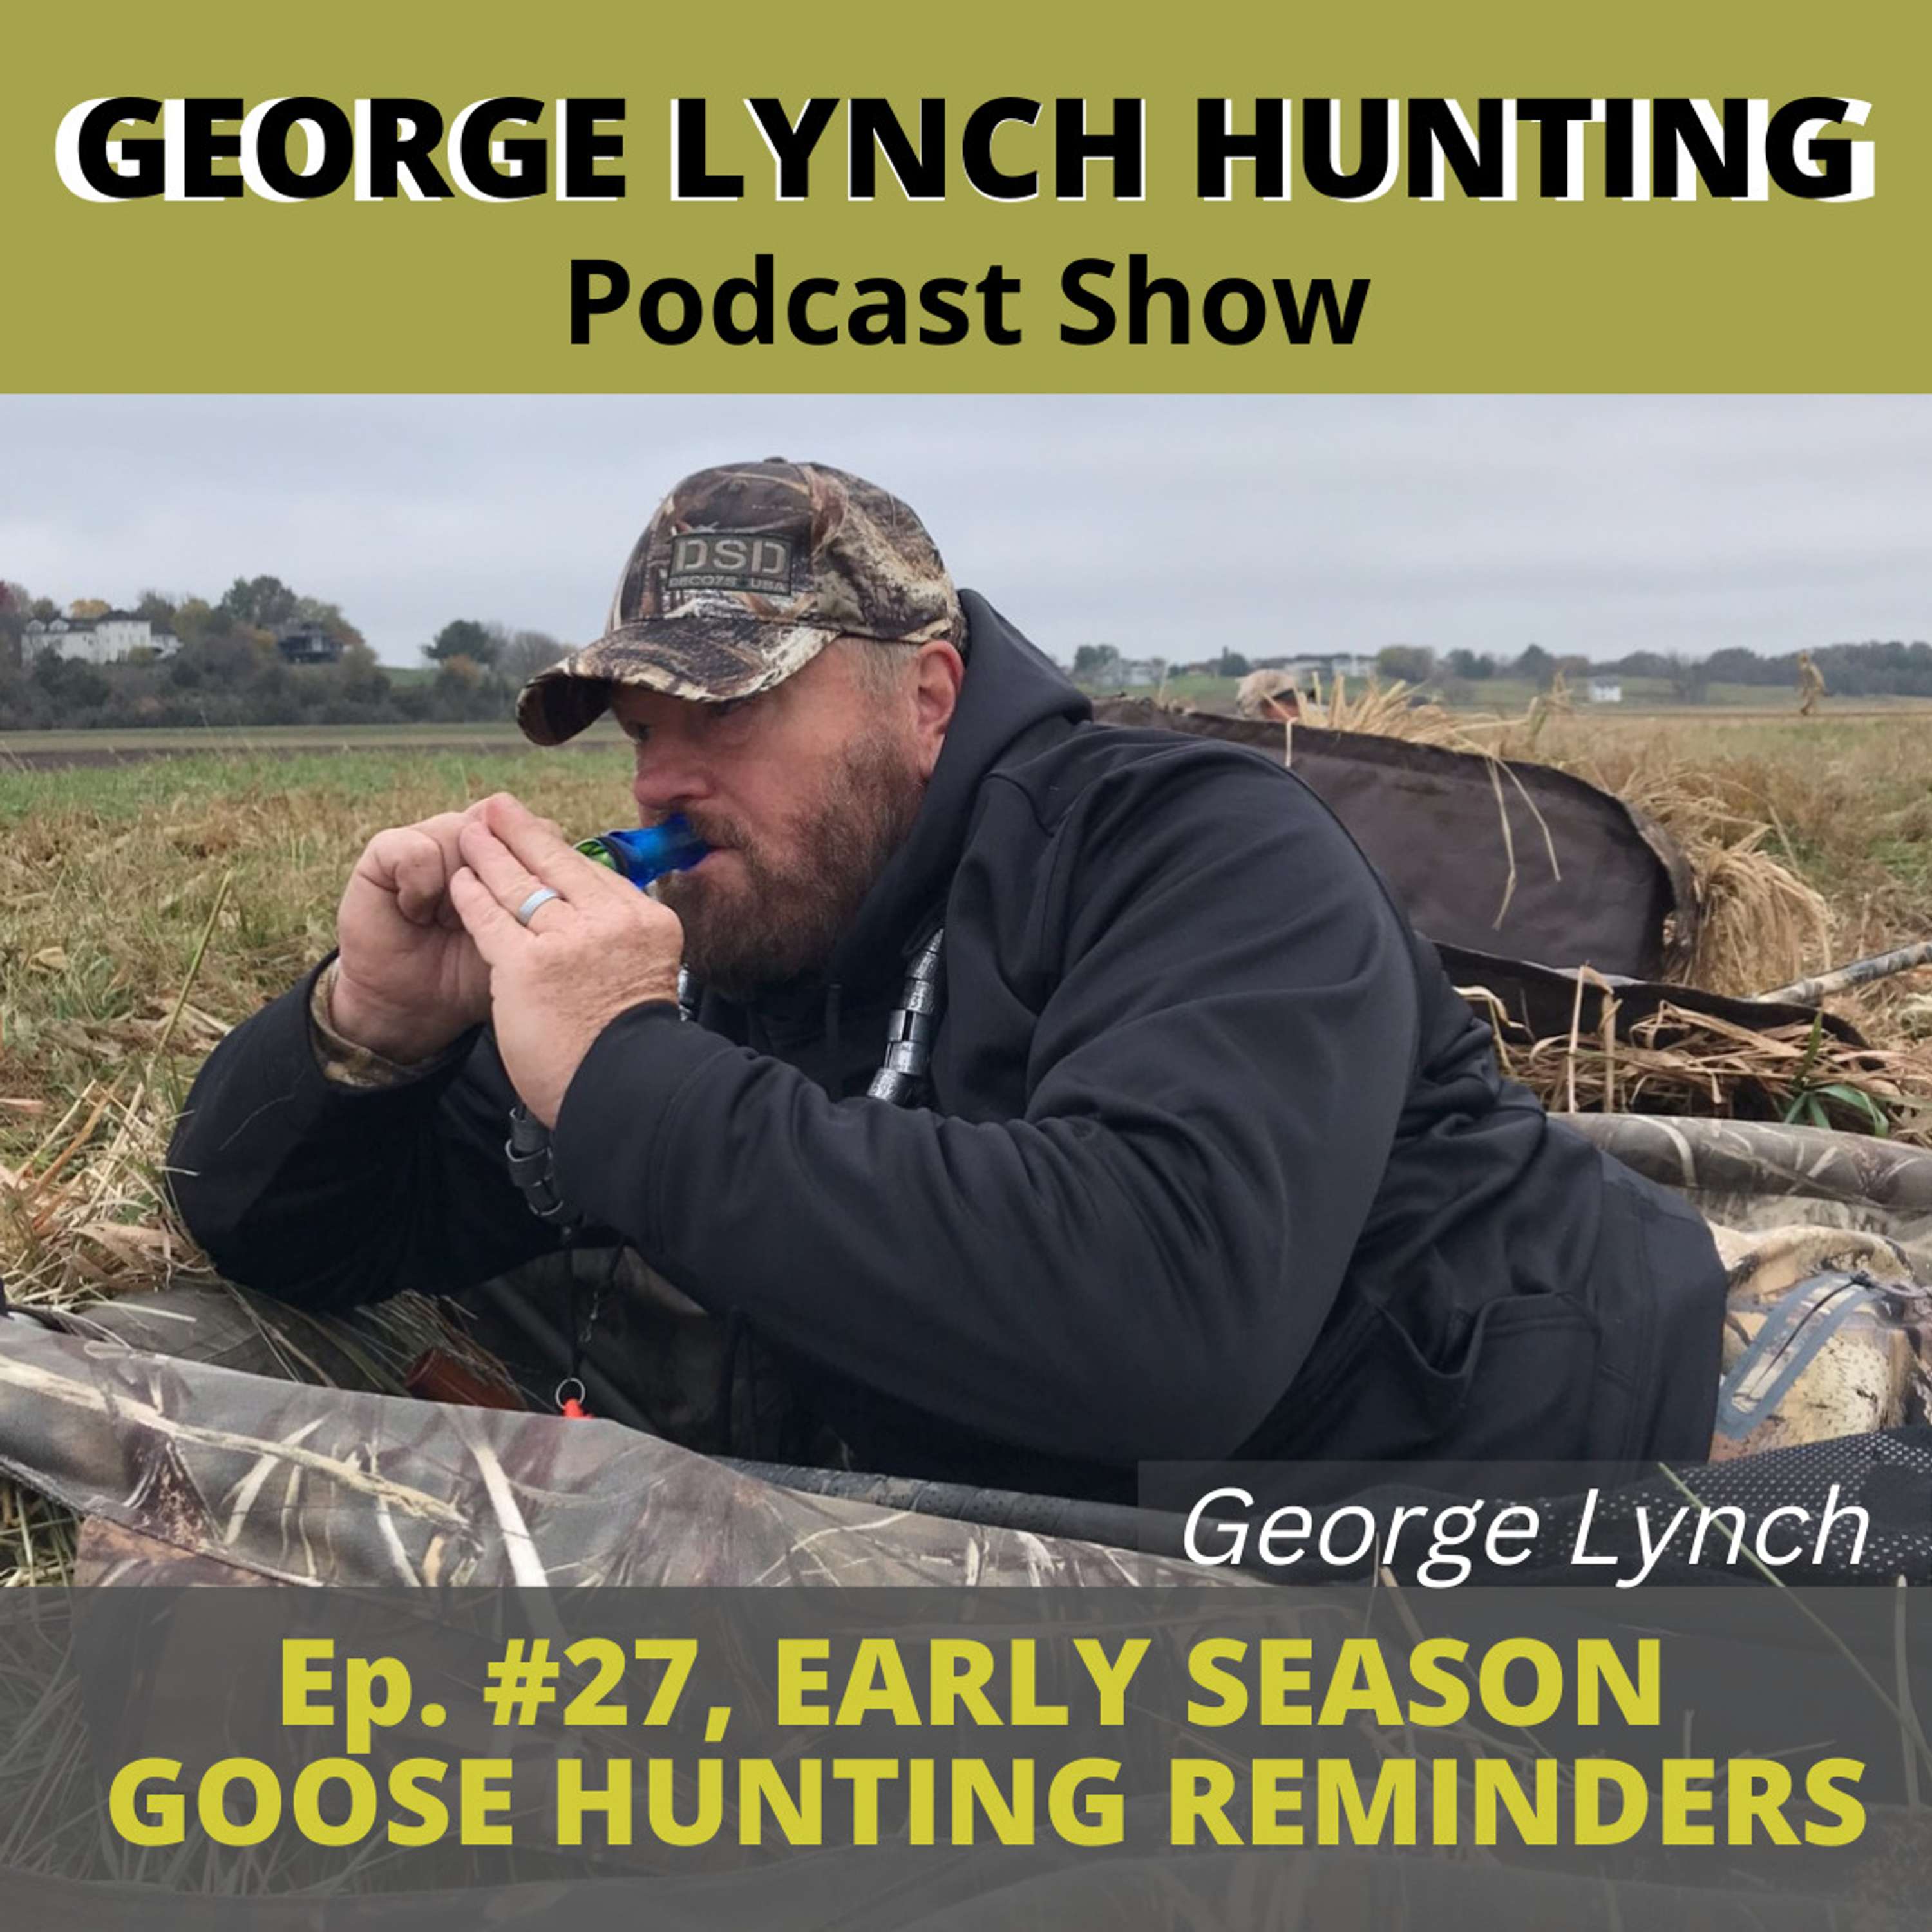 GEORGE LYNCH'S Early Season GOOSE HUNTING Reminders